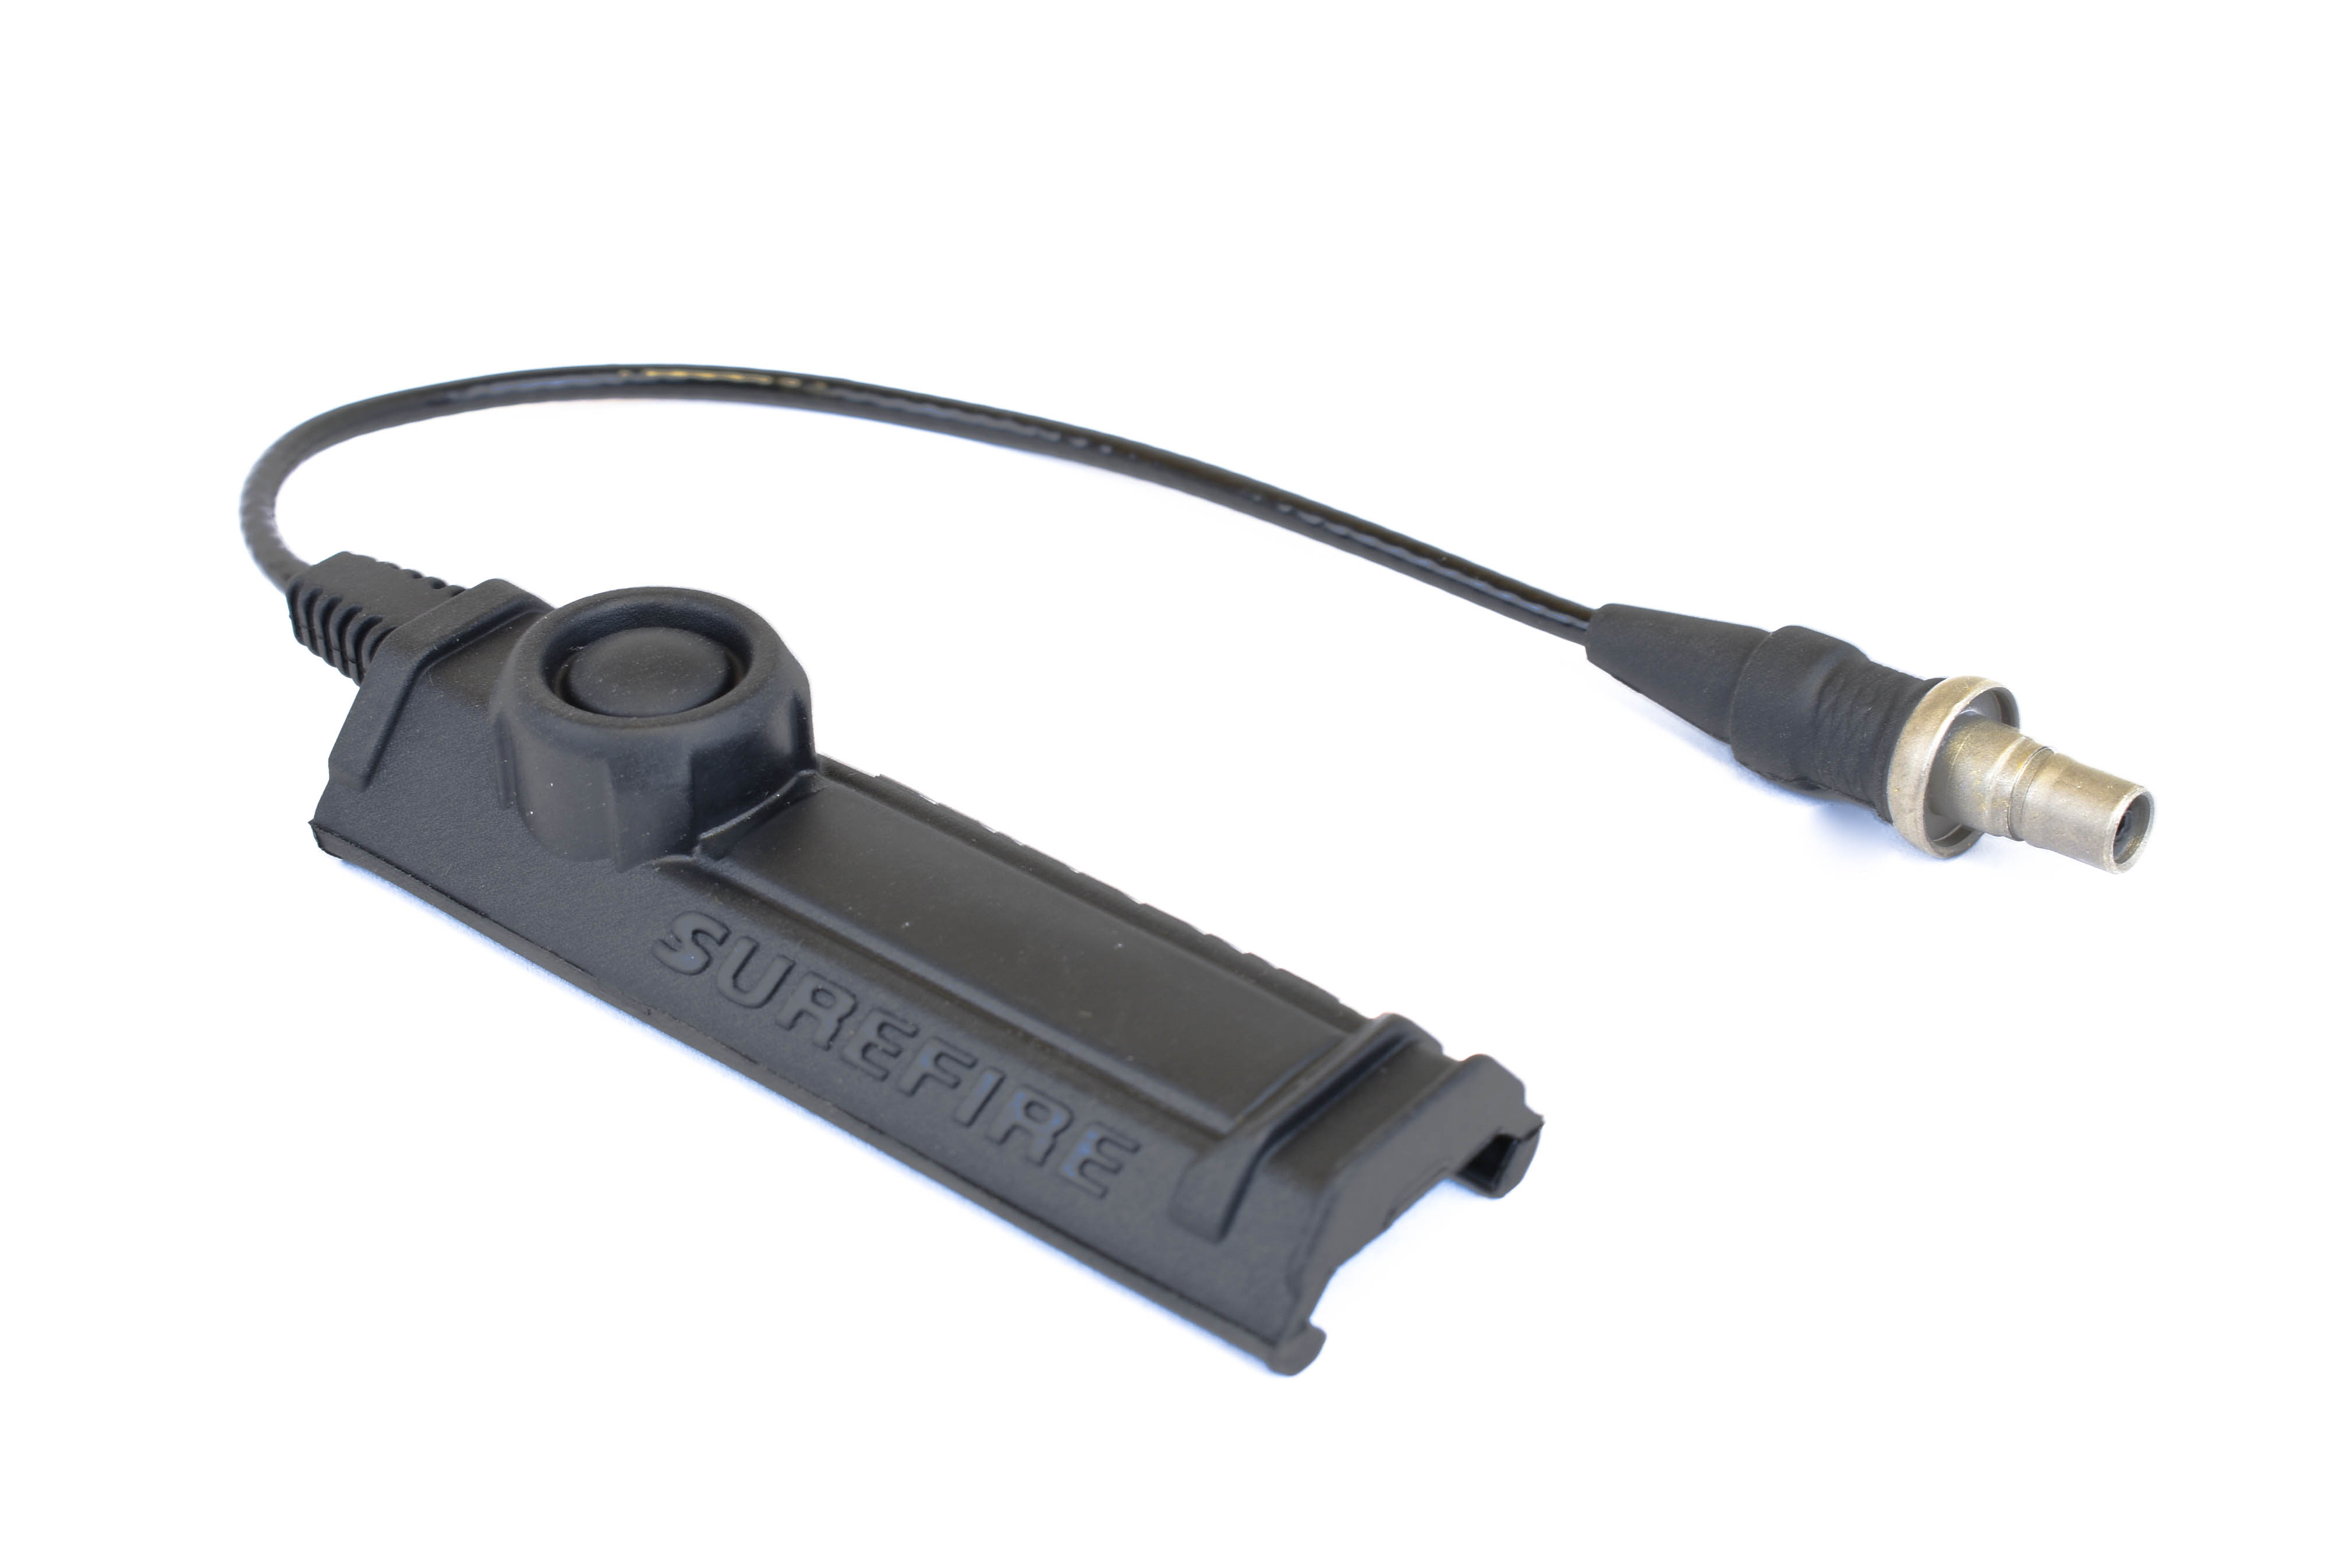 SureFire Remote Dual Switch for Weapon Light